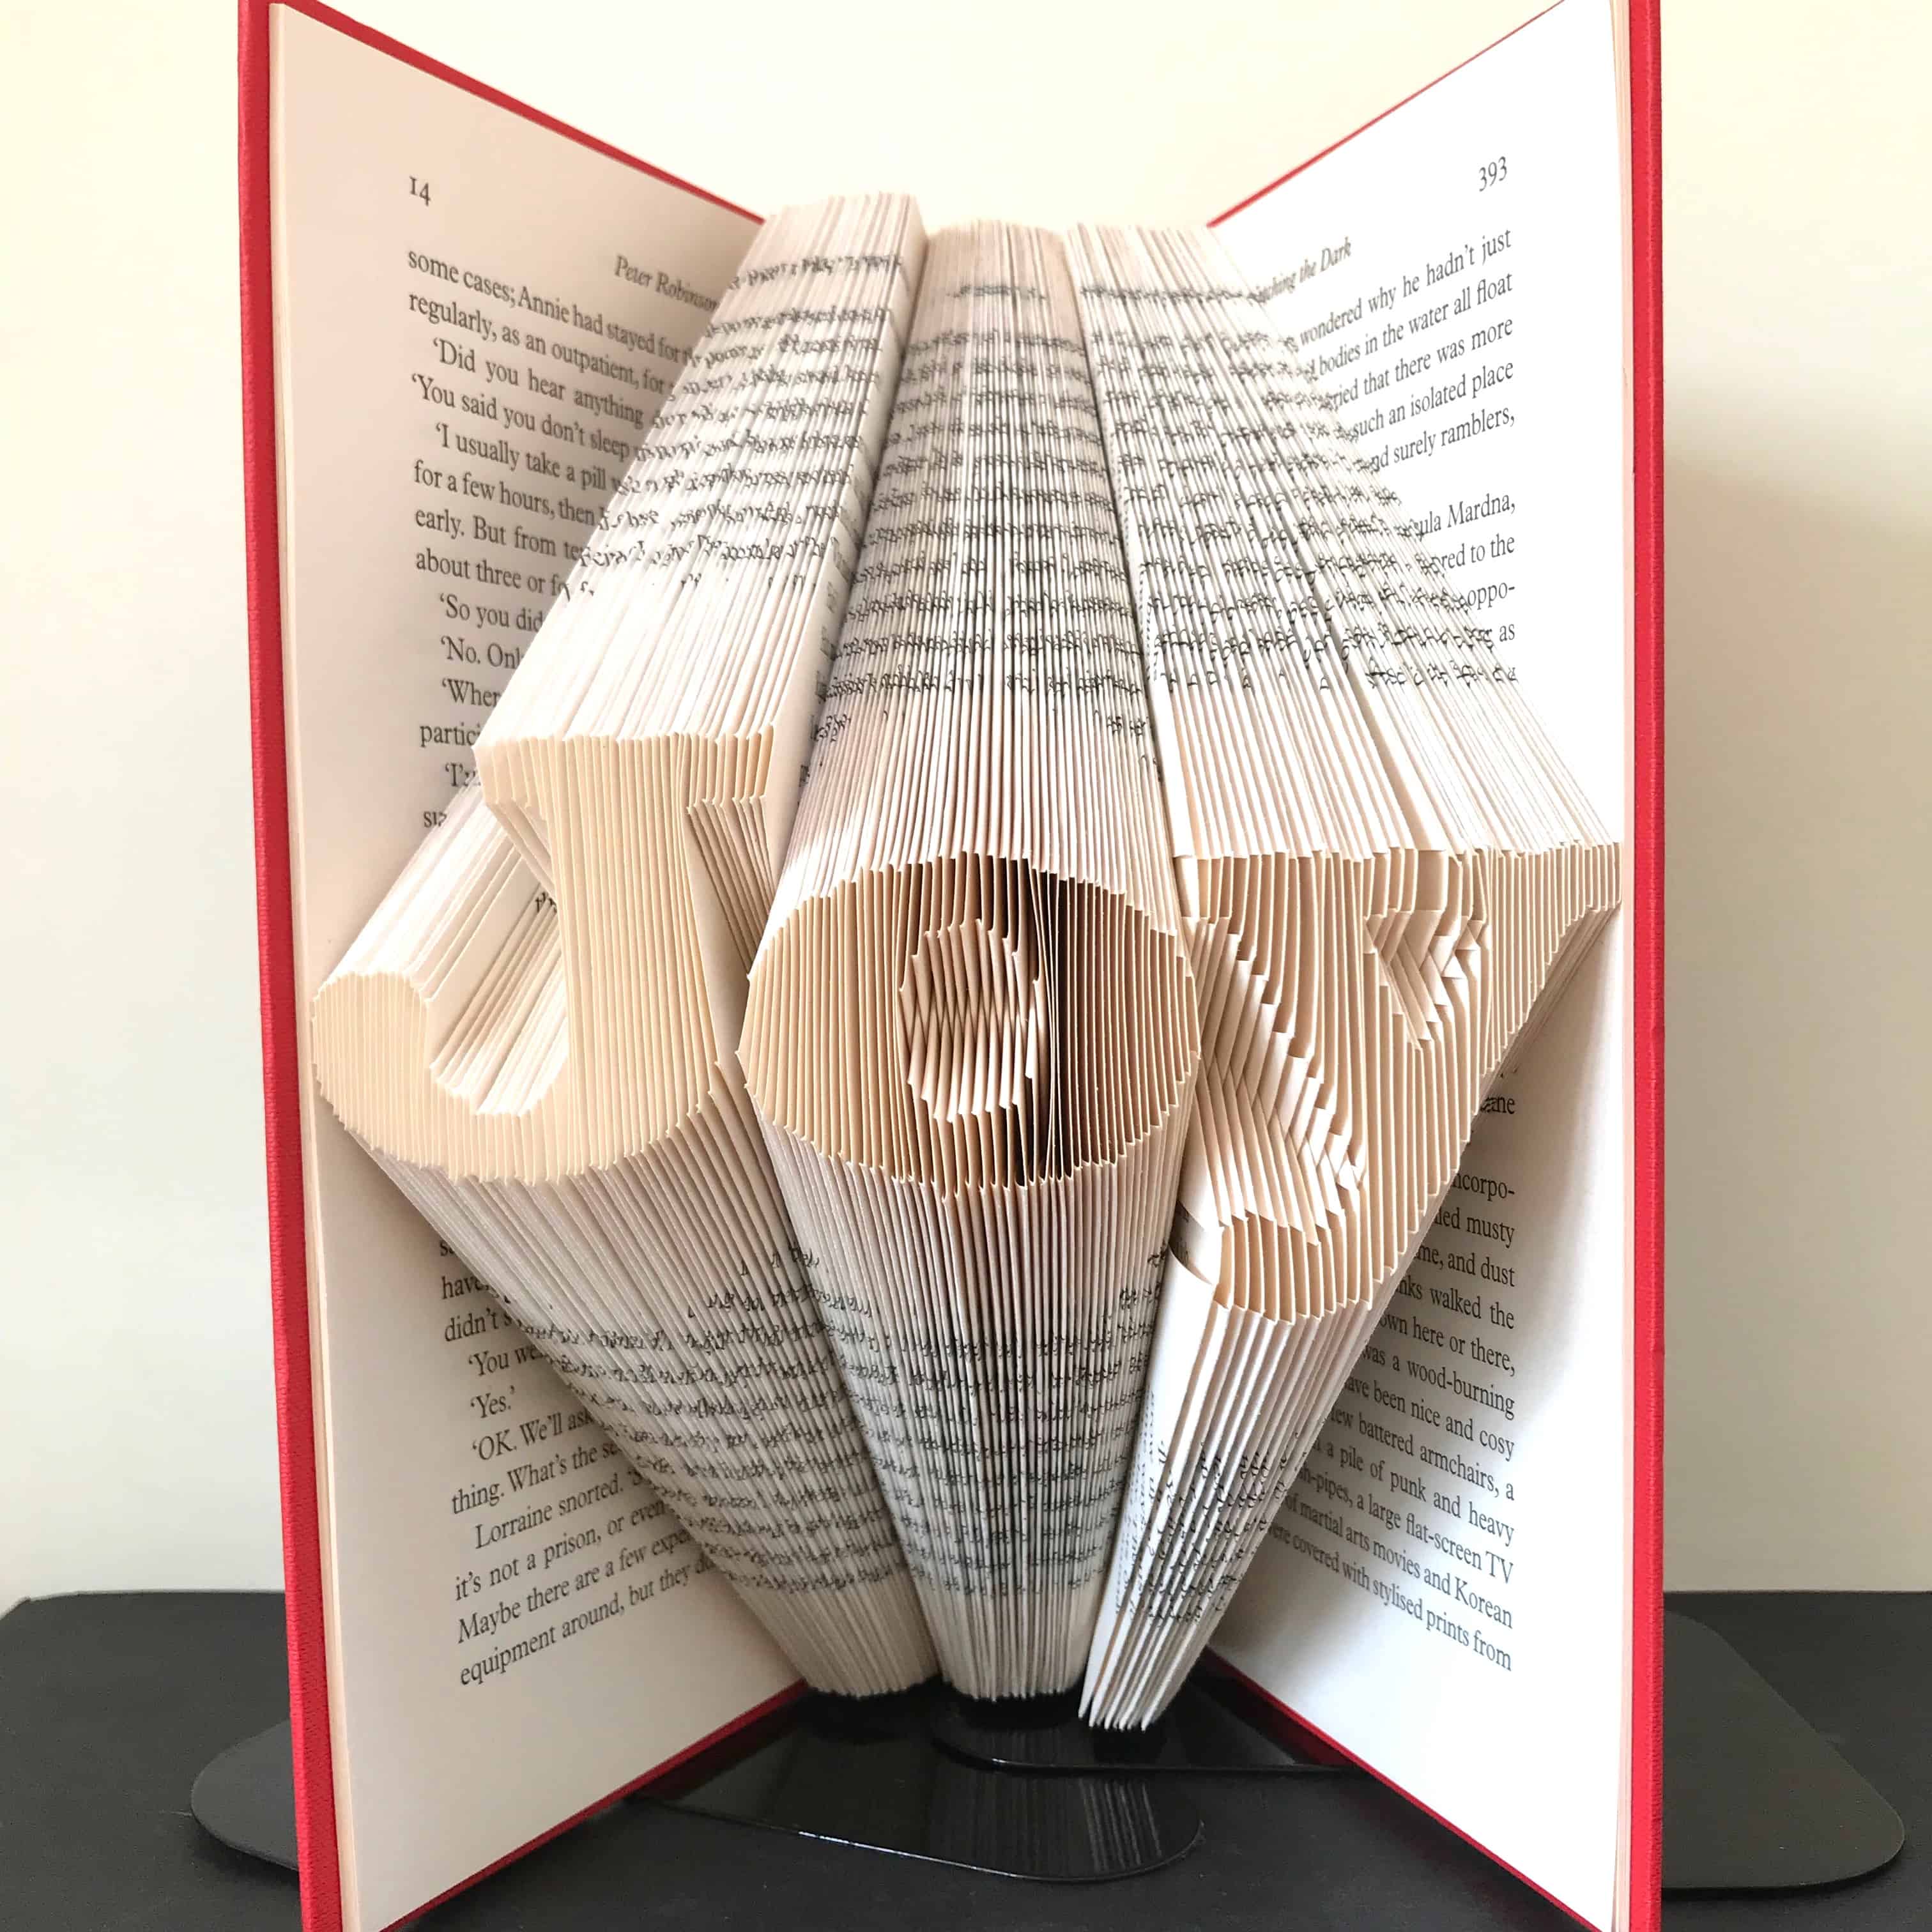 Book folding pattern 'be kind or be quiet' unique gift!